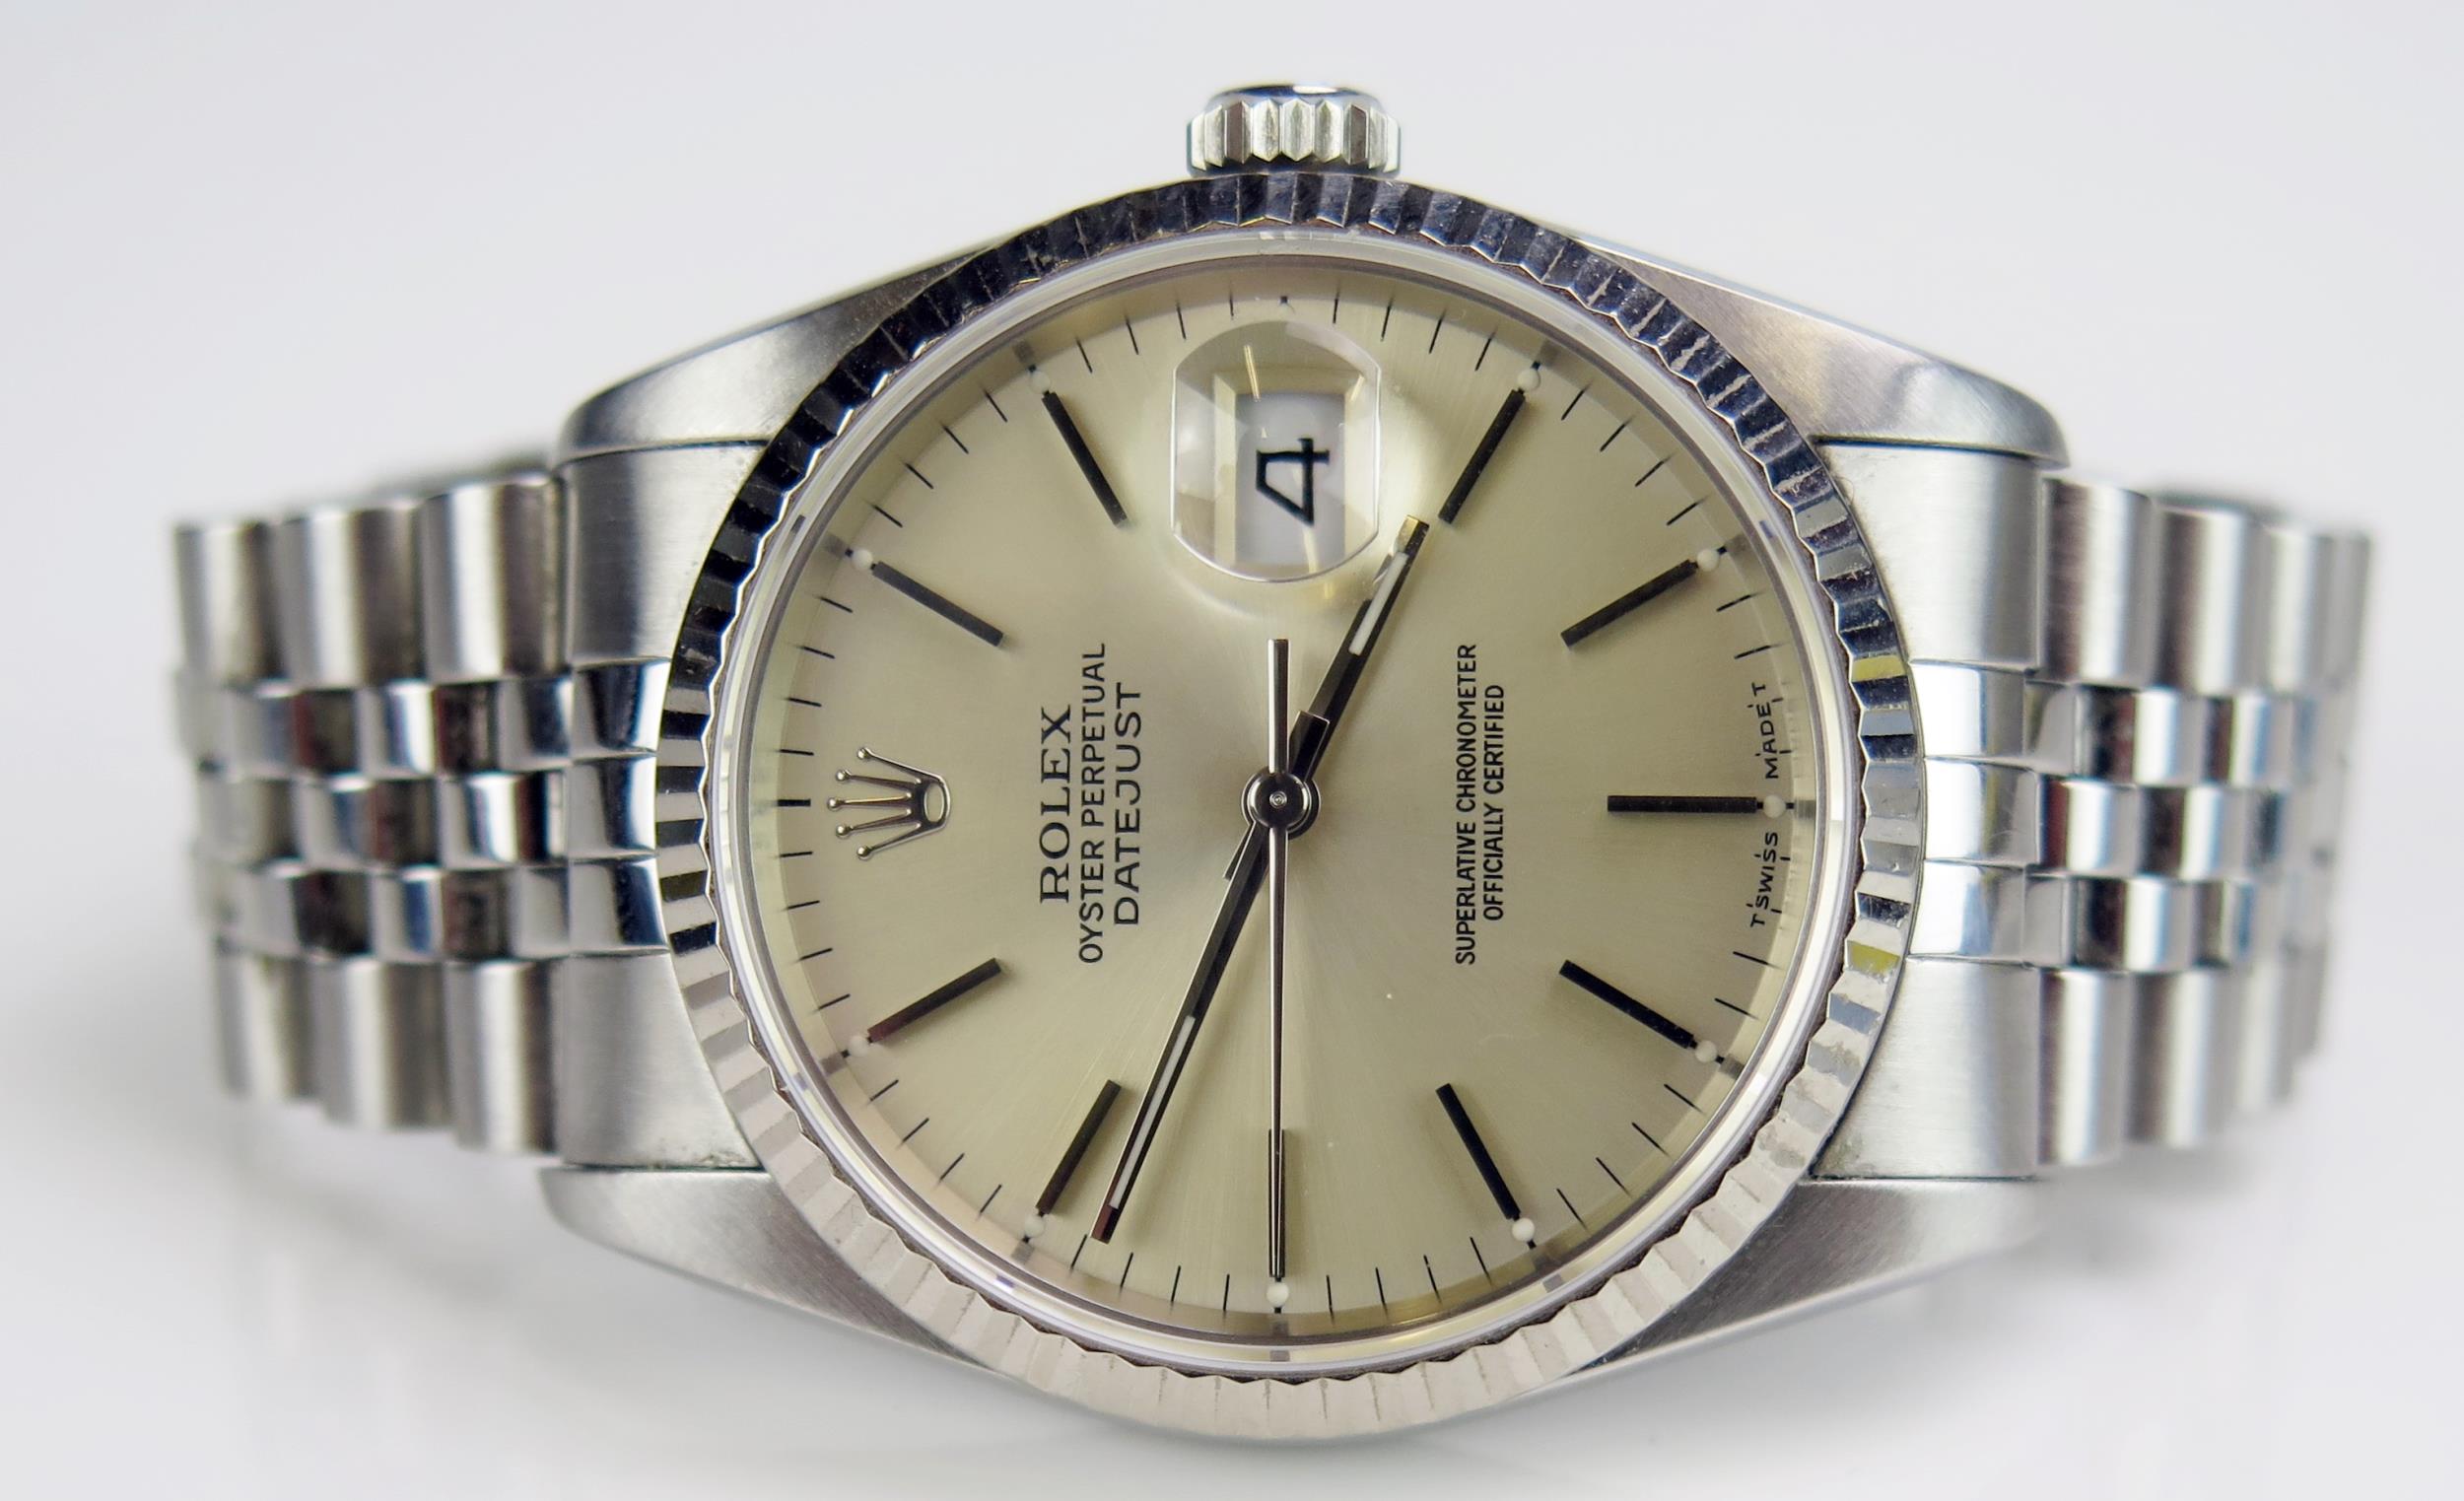 A ROLEX Gent's Oyster Perpetual Datejust S.C.O.C. Steel Cased Wristwatch on a 63600 Jubilee Bracelet - Image 6 of 10